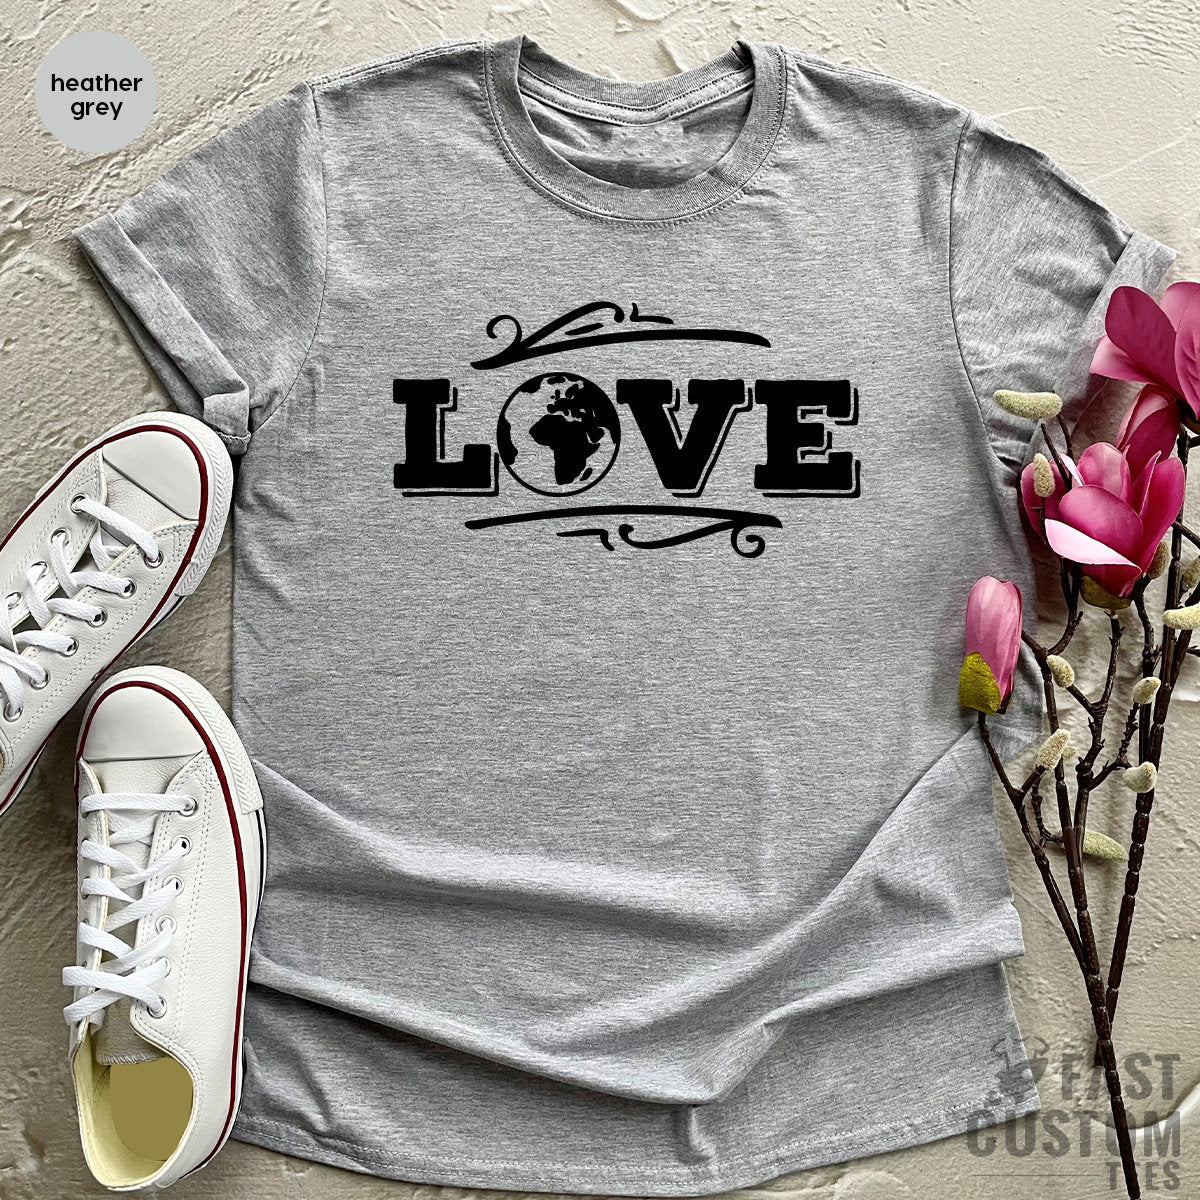 Love Our Planet T-Shirt, Earth Days T Shirt, Recycling TShirt, Environment Shirt, Teachers Shirt, Gift For Activist, Nature Lover Tees - Fastdeliverytees.com